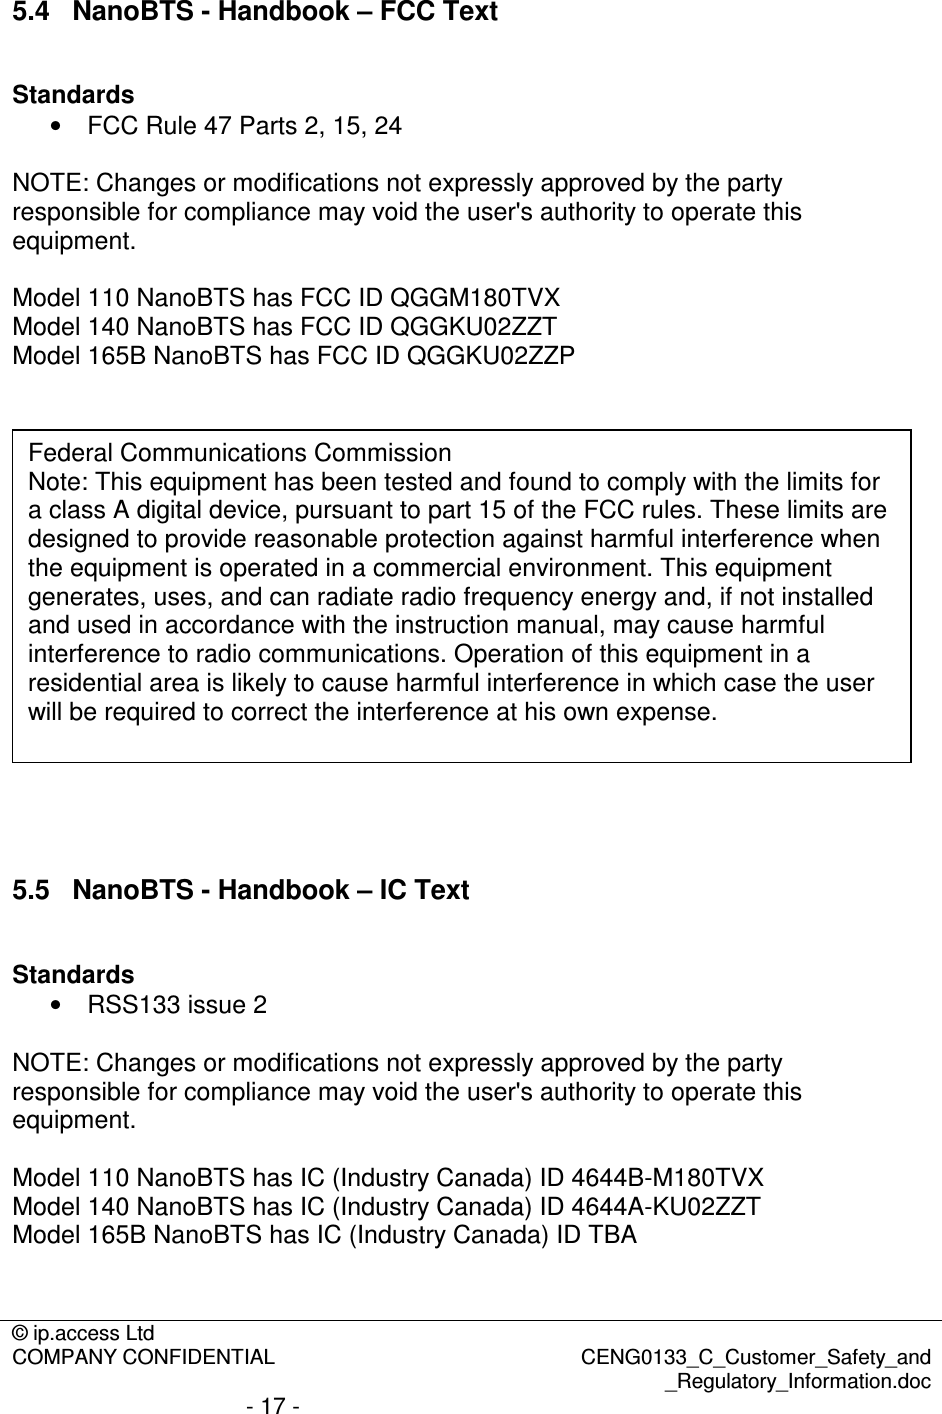 © ip.access Ltd  COMPANY CONFIDENTIAL  CENG0133_C_Customer_Safety_and _Regulatory_Information.doc - 17 -  5.4  NanoBTS - Handbook – FCC Text  Standards •  FCC Rule 47 Parts 2, 15, 24  NOTE: Changes or modifications not expressly approved by the party responsible for compliance may void the user&apos;s authority to operate this equipment.  Model 110 NanoBTS has FCC ID QGGM180TVX Model 140 NanoBTS has FCC ID QGGKU02ZZT Model 165B NanoBTS has FCC ID QGGKU02ZZP      5.5  NanoBTS - Handbook – IC Text  Standards •  RSS133 issue 2  NOTE: Changes or modifications not expressly approved by the party responsible for compliance may void the user&apos;s authority to operate this equipment.  Model 110 NanoBTS has IC (Industry Canada) ID 4644B-M180TVX Model 140 NanoBTS has IC (Industry Canada) ID 4644A-KU02ZZT Model 165B NanoBTS has IC (Industry Canada) ID TBA   Federal Communications Commission Note: This equipment has been tested and found to comply with the limits for a class A digital device, pursuant to part 15 of the FCC rules. These limits are designed to provide reasonable protection against harmful interference when the equipment is operated in a commercial environment. This equipment generates, uses, and can radiate radio frequency energy and, if not installed and used in accordance with the instruction manual, may cause harmful interference to radio communications. Operation of this equipment in a residential area is likely to cause harmful interference in which case the user will be required to correct the interference at his own expense. 